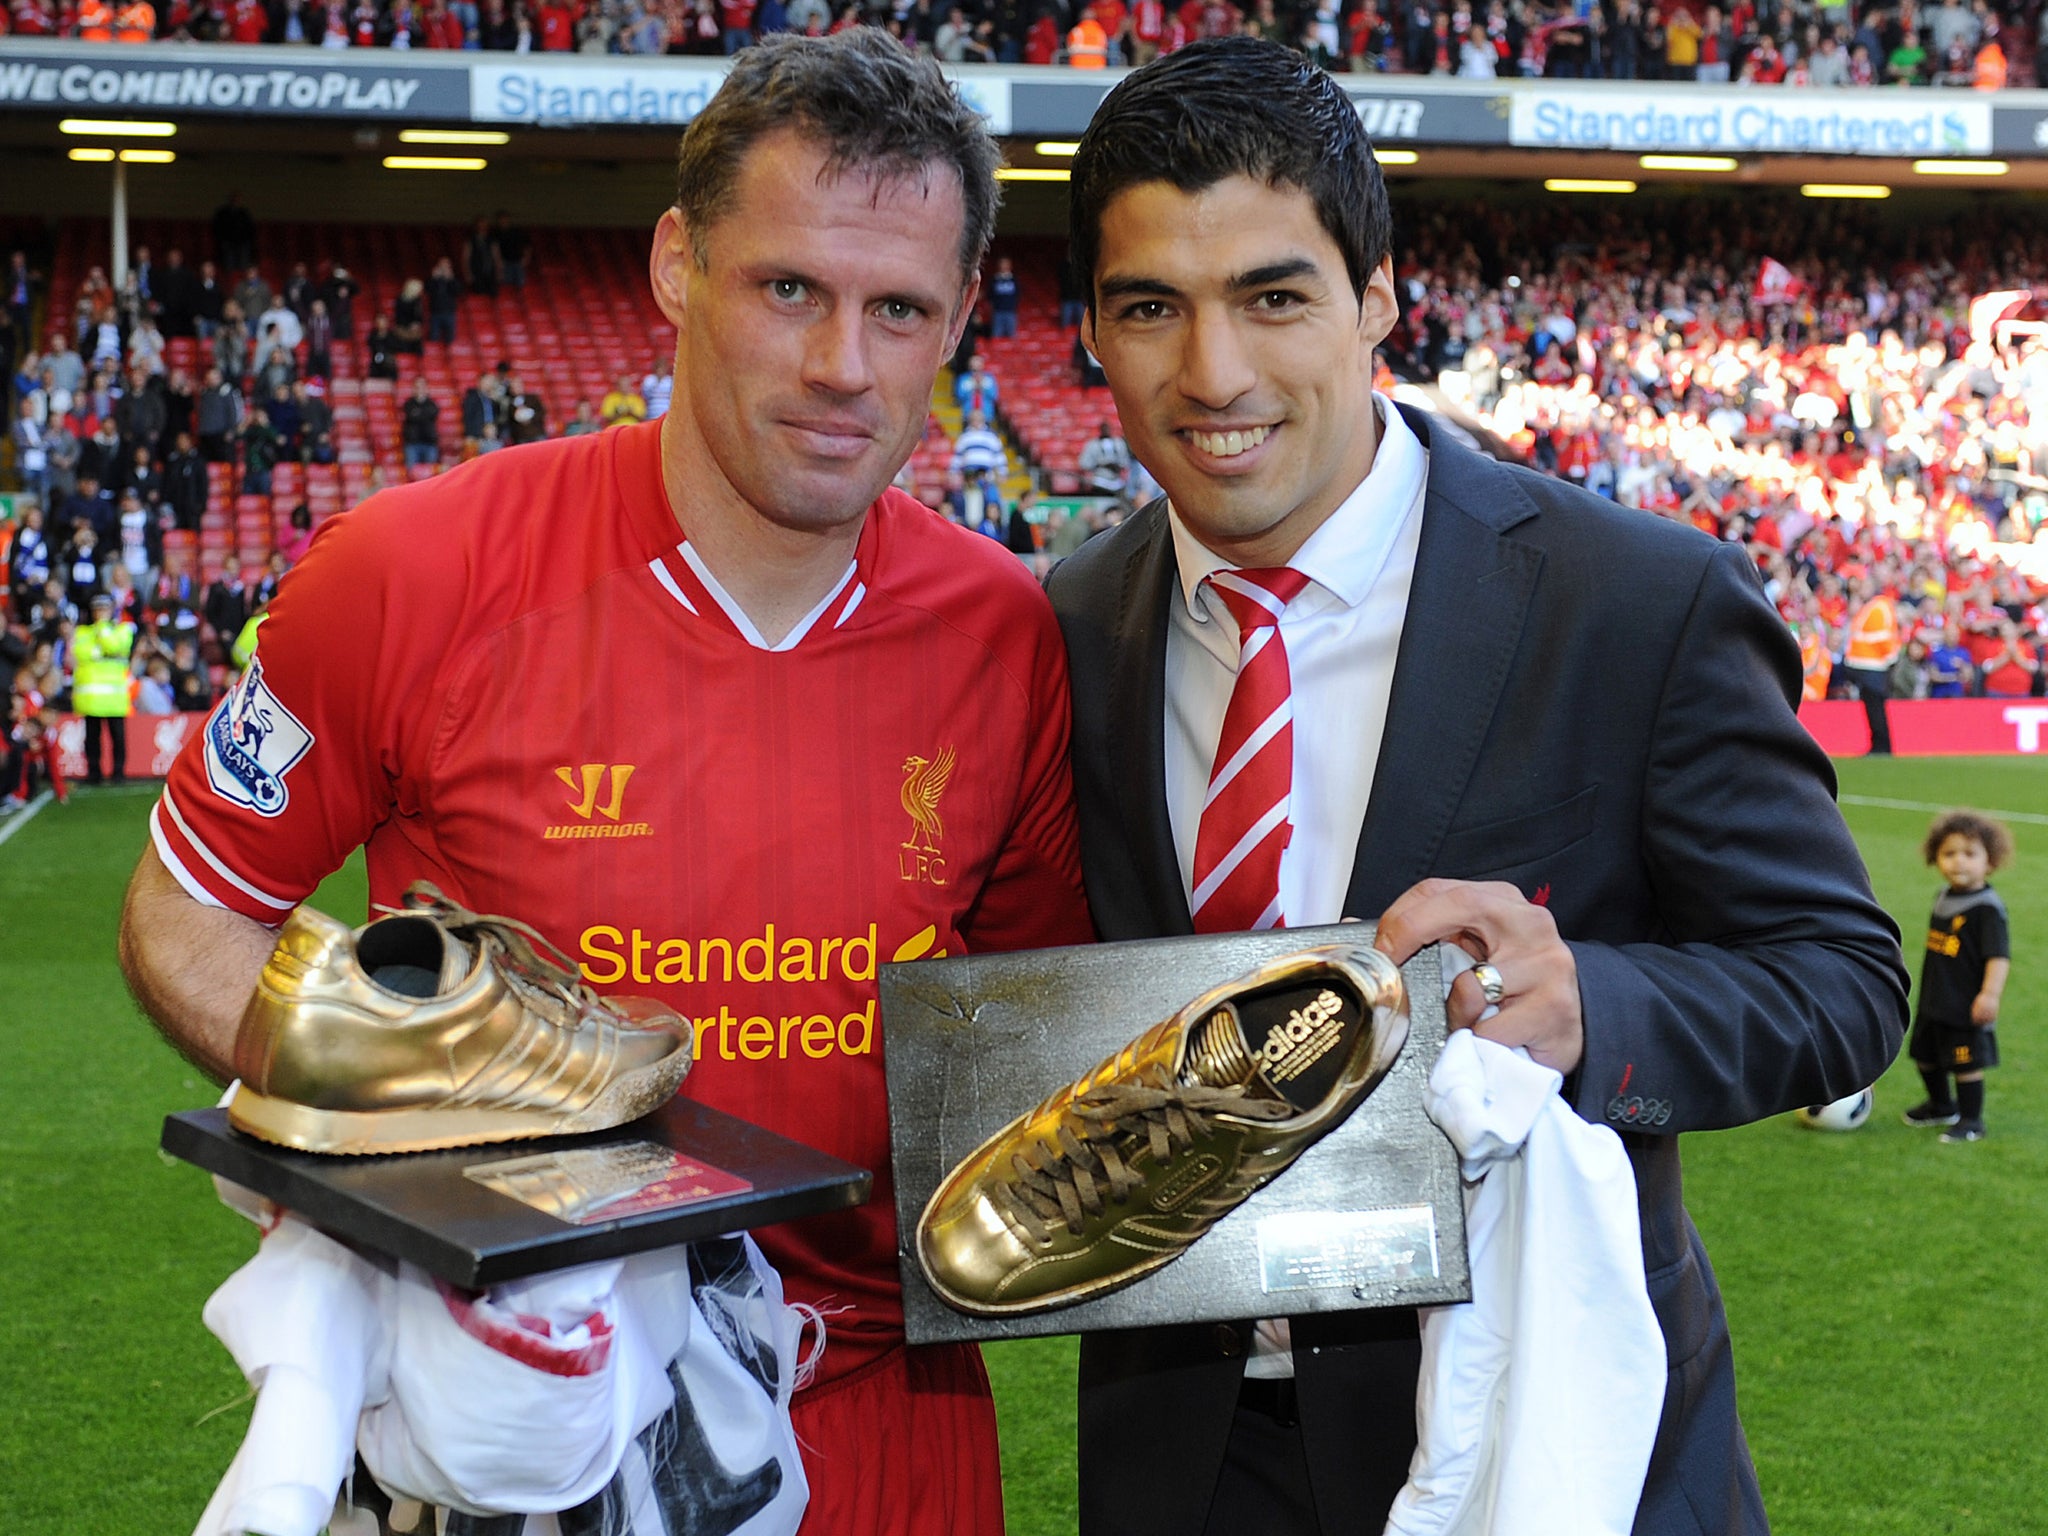 Jamie Carragher and Luis Suarez are pictured together on the final day of the 2012/13 Premier League season